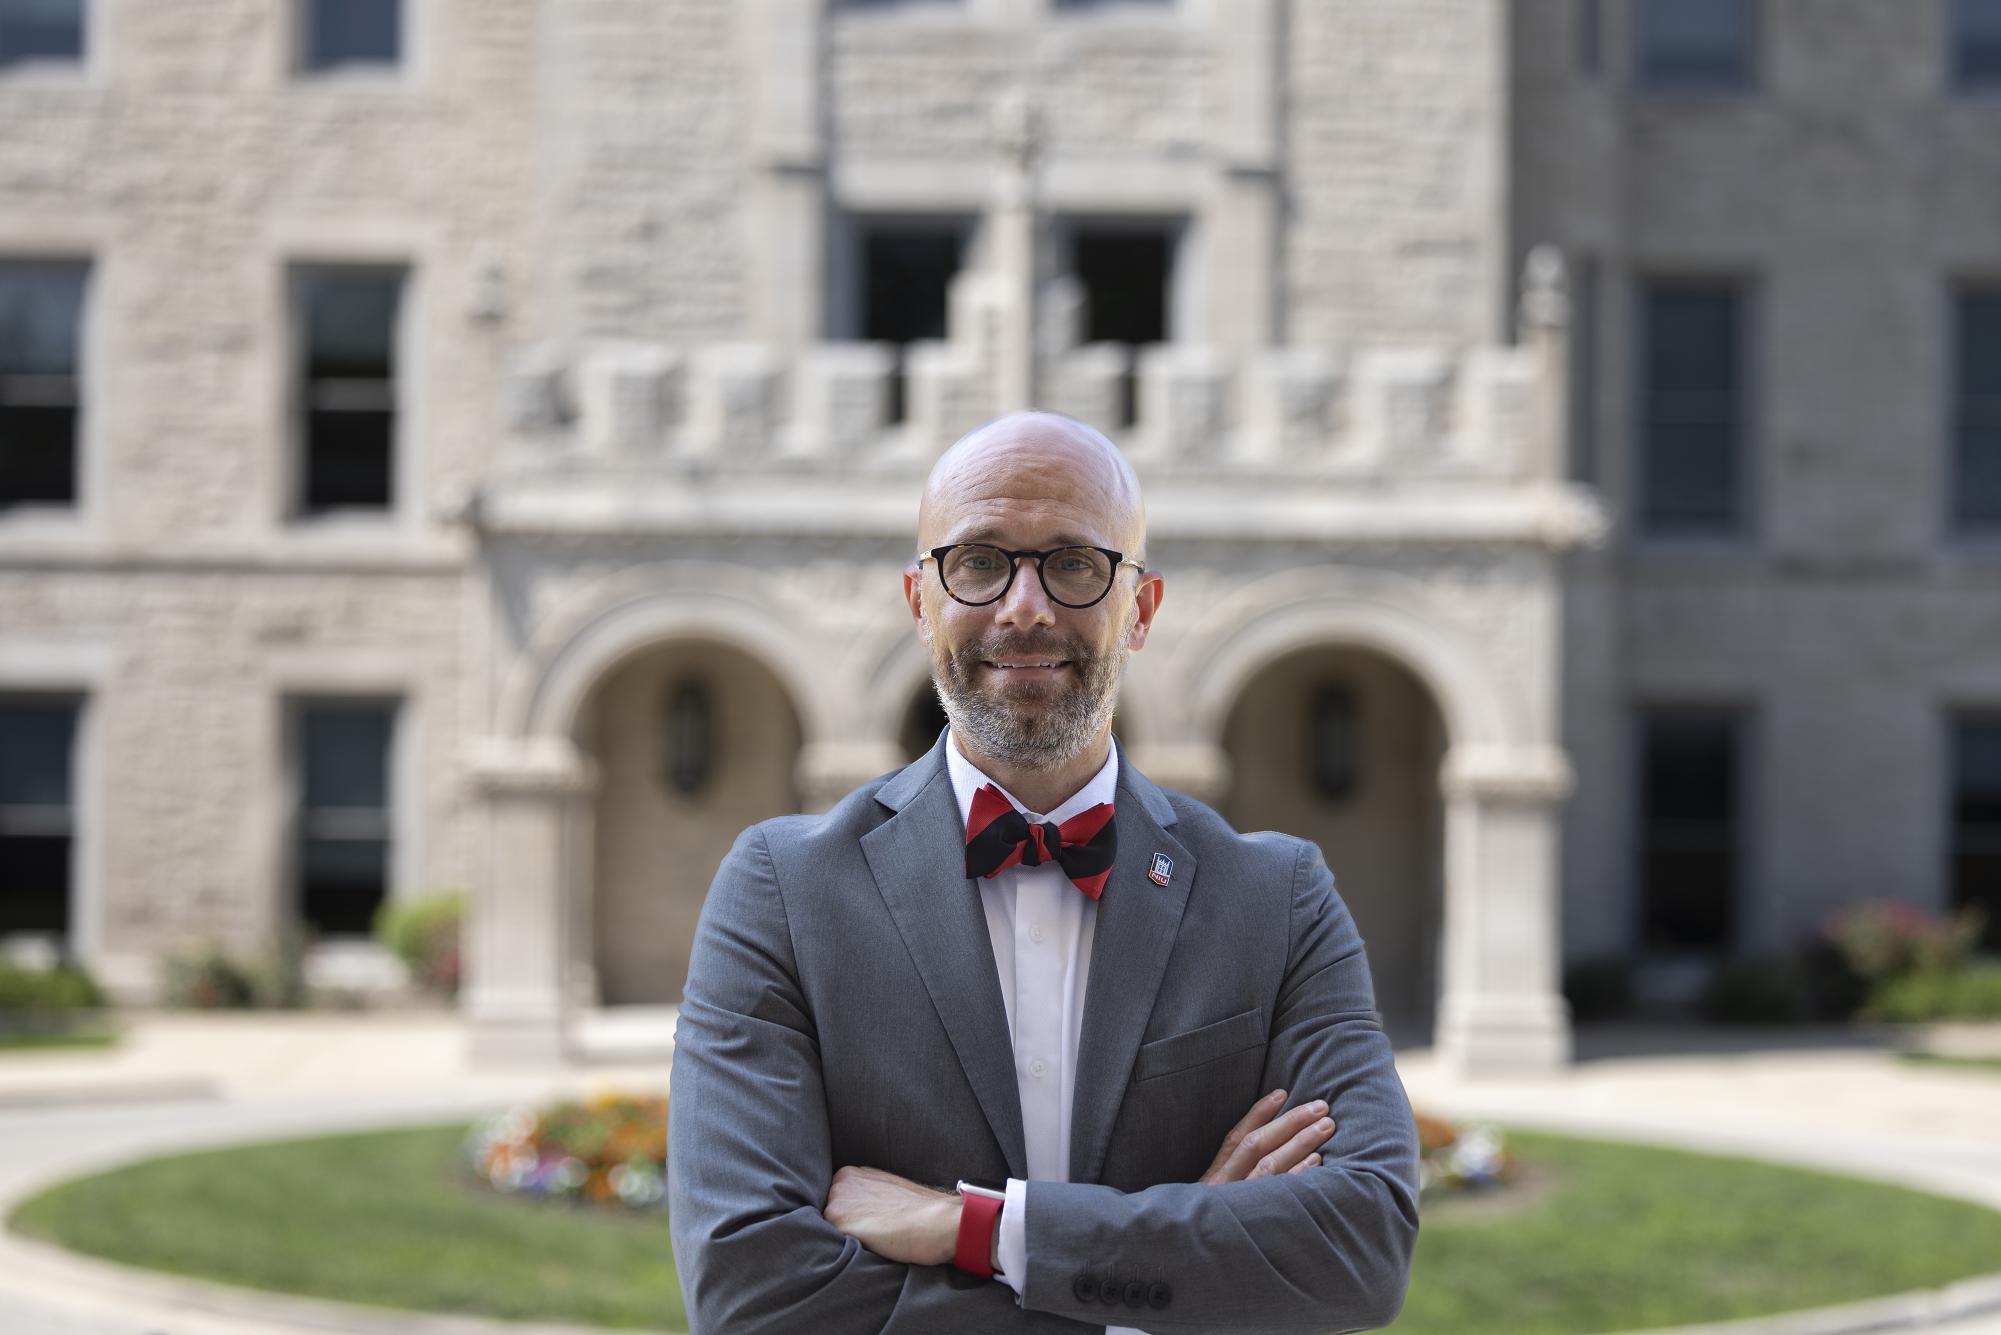 John Acardo stands in front of Altgeld Hall. Acardo was recently hired as the senior associate vice president and chief Human Resource officer. (Courtesy of John Acardo)